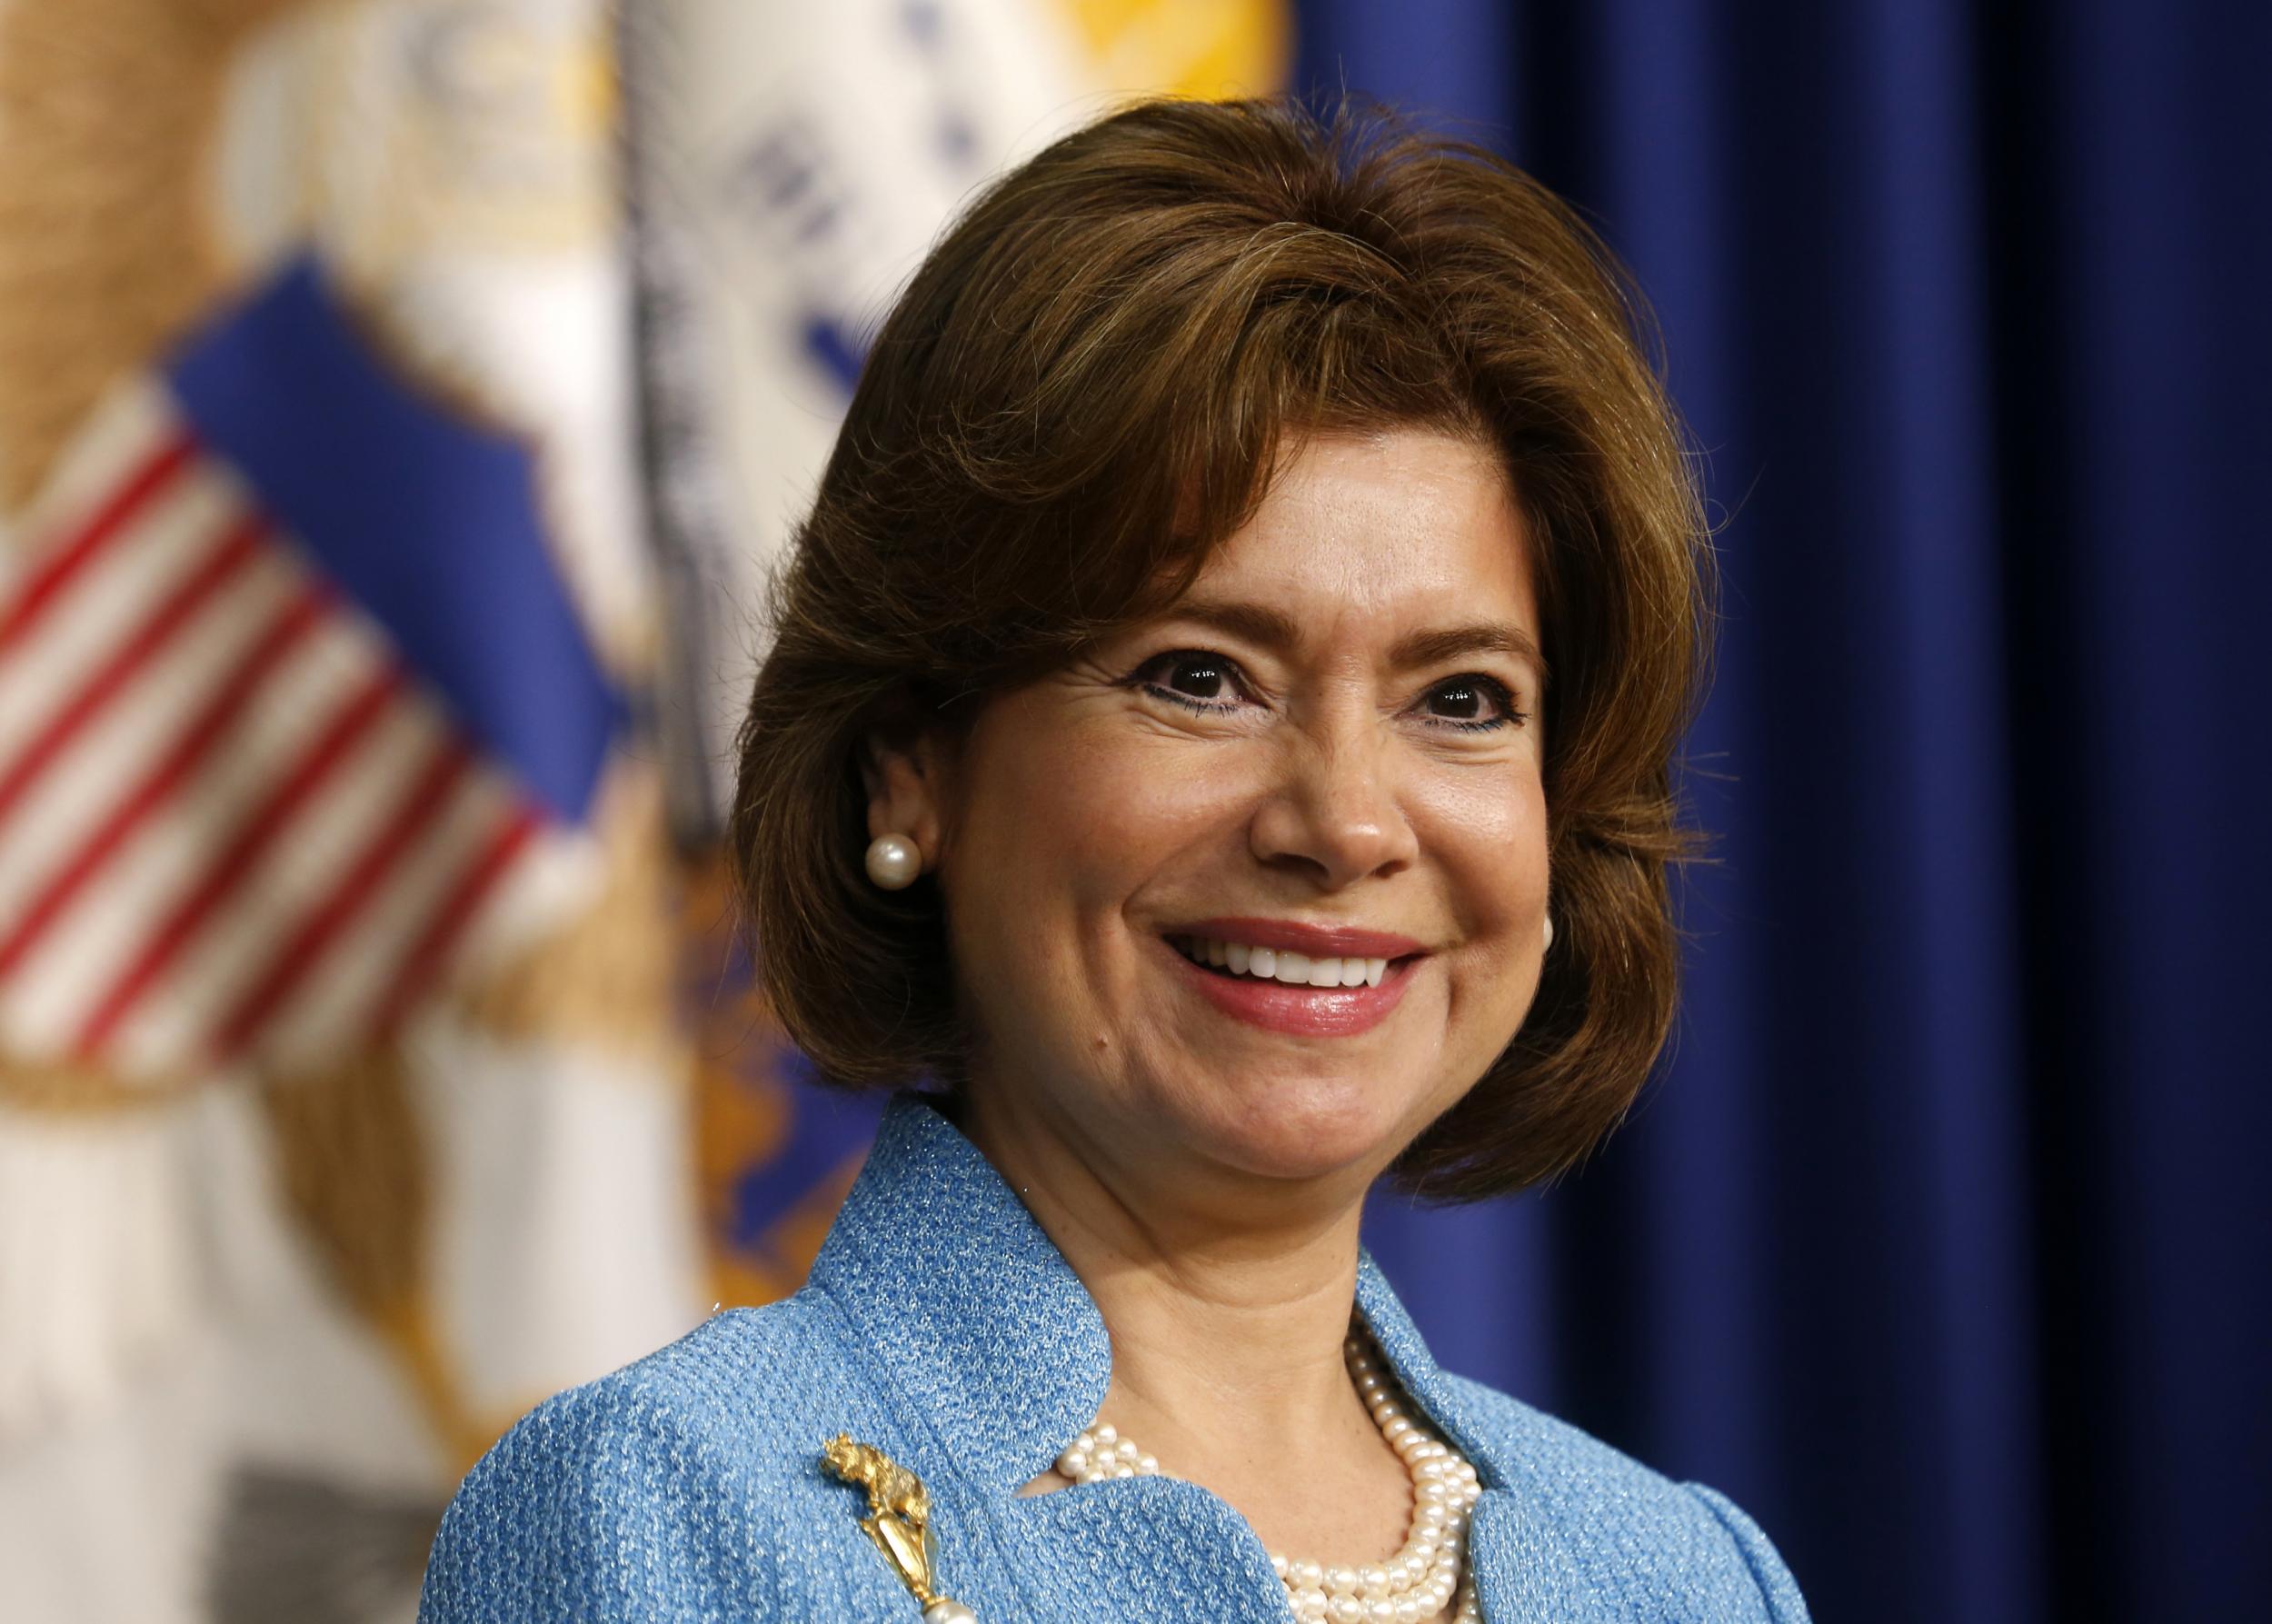 Maria Contreras-Sweet was chief of the Small Business Administration under Barack Obama